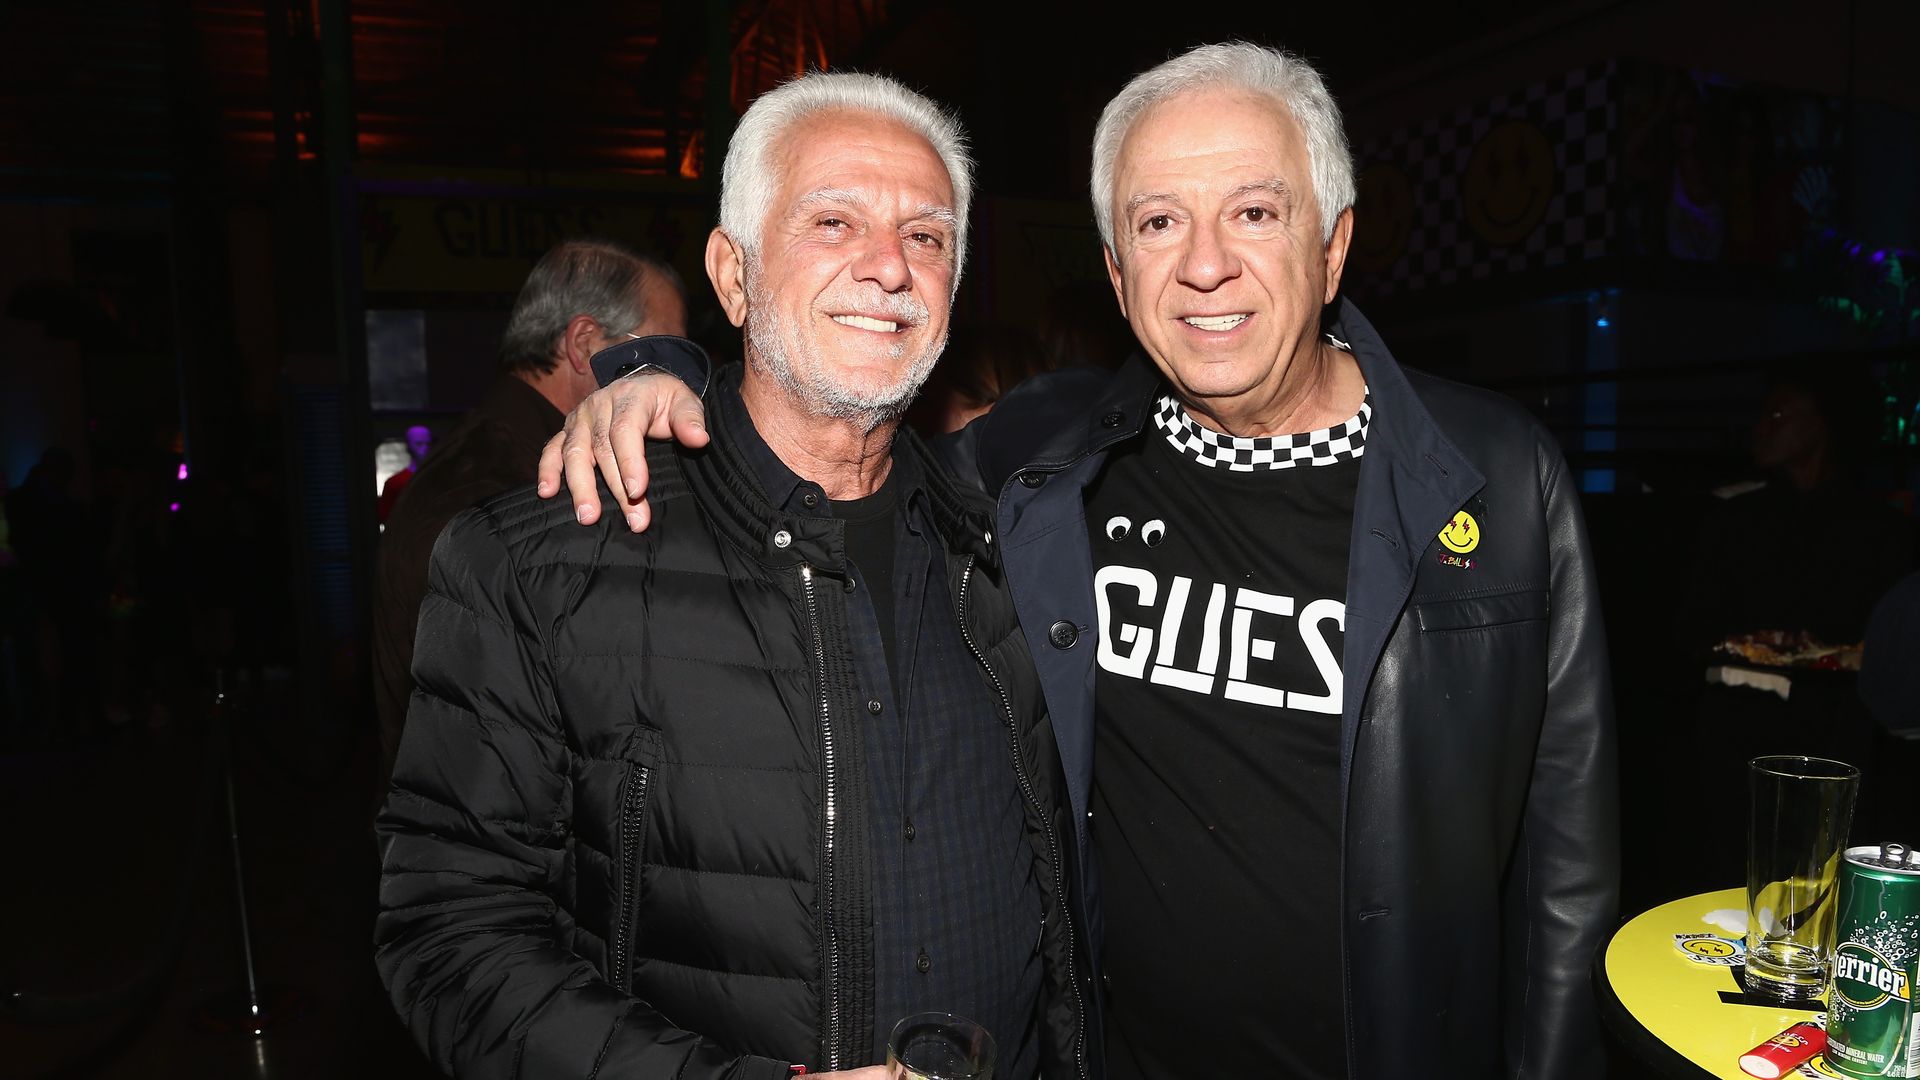 Guess co-founders and brother Maurice and Paul Marciano, dressed in black, pose together for the camera at a party in Los Angeles.